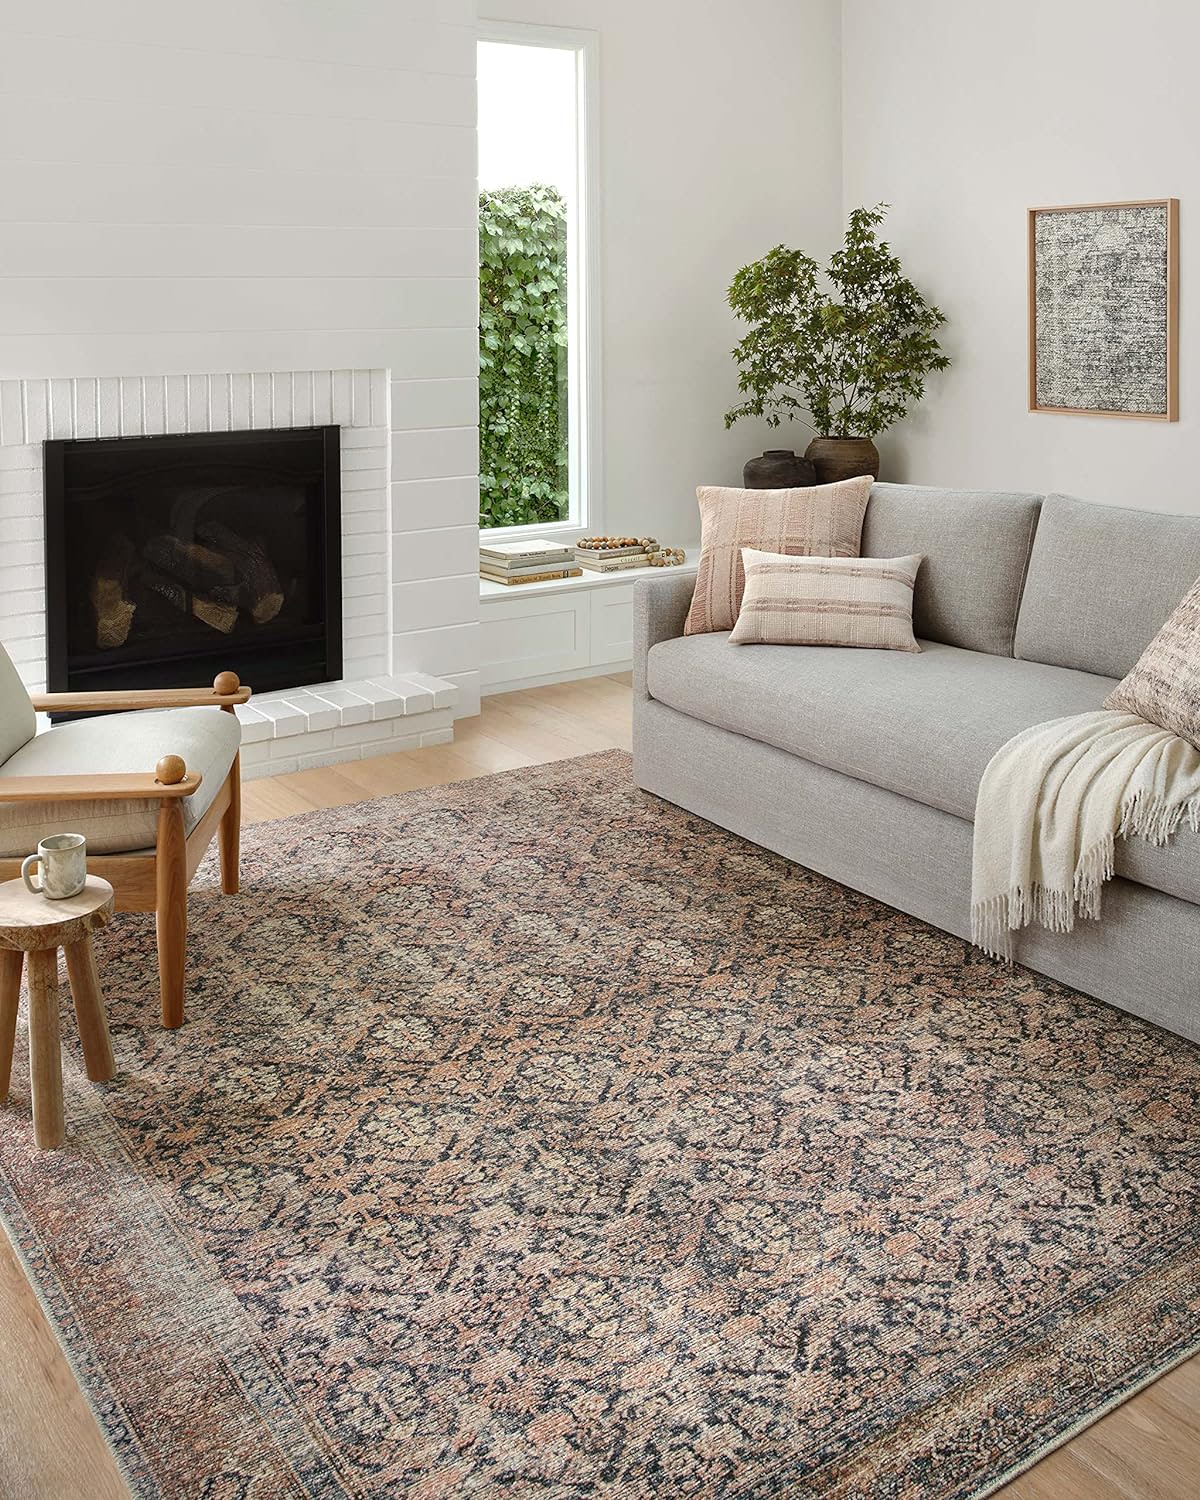 http://cdn.apartmenttherapy.info/image/upload/v1696535622/gen-workflow/product-database/Amber-Lewis-Loloi-Billie-Collection-Ink-Salmon-Rug.jpg